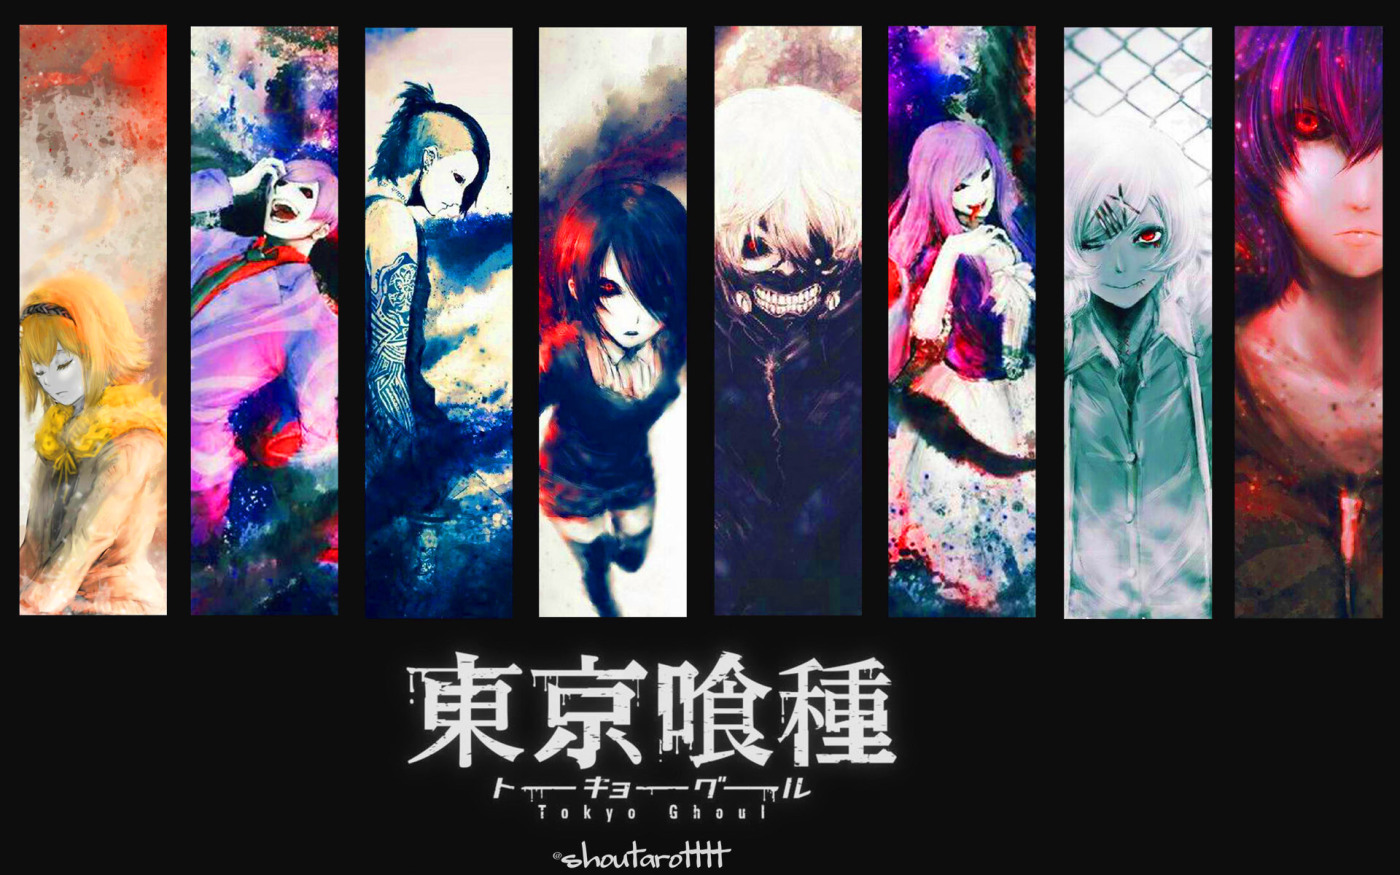 Tokyo Ghoul The Anime Sheikh